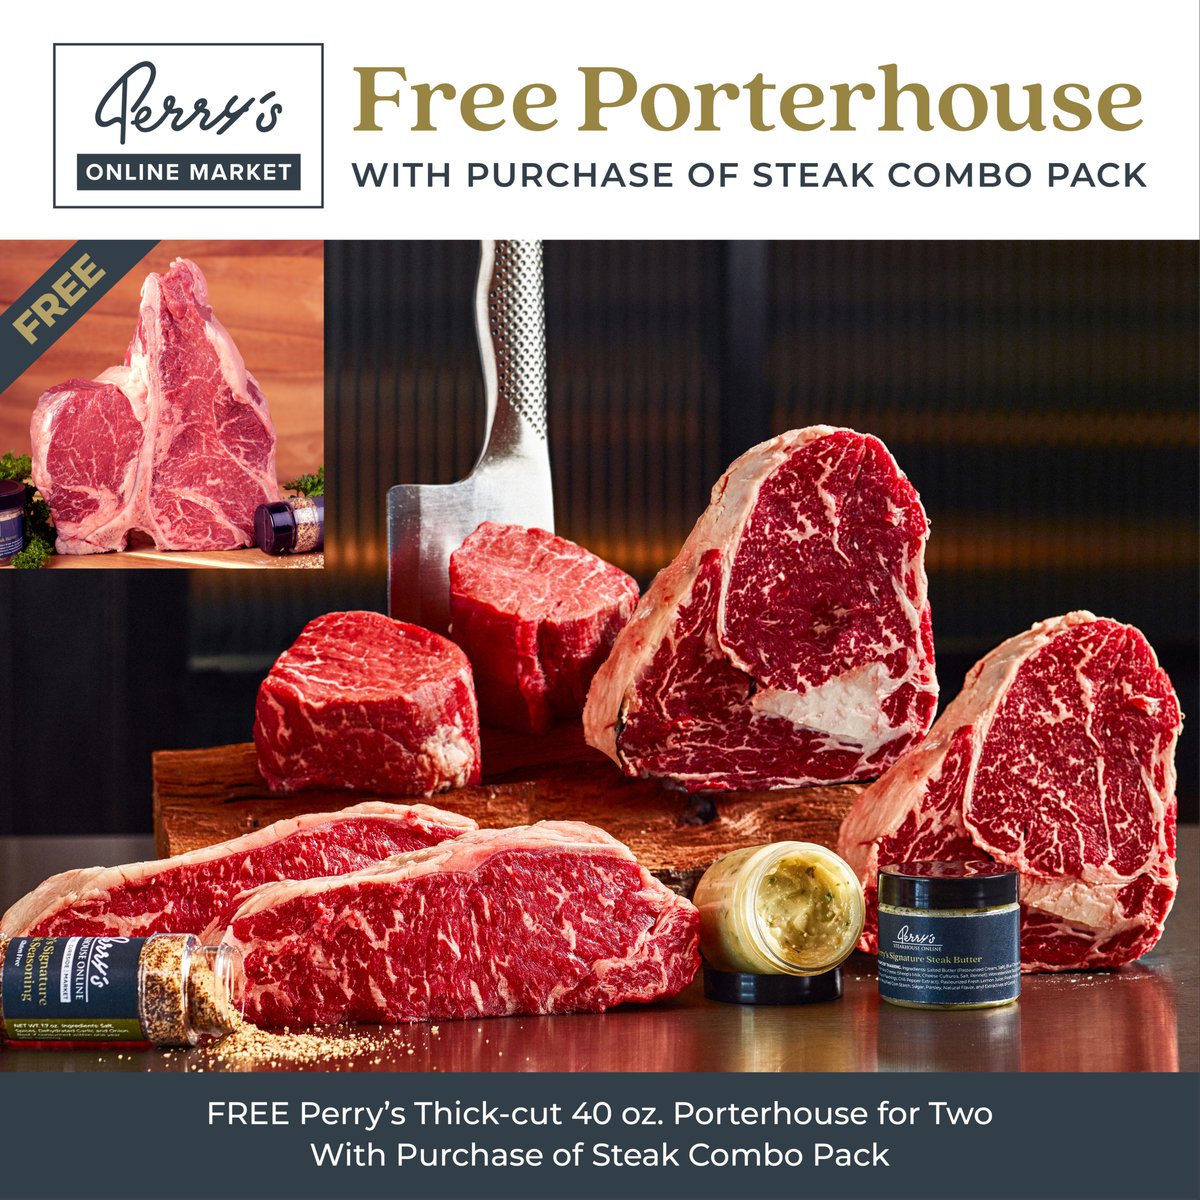 🥩 Act Fast! Limited Time Offer: Receive a Free Perry’s Thick-Cut 40 oz. Porterhouse for Two with the purchase of our Perry’s Steak Combo Pack shipped to your door.

Shop Now: shop.perryssteakhouse.com/products/free-…